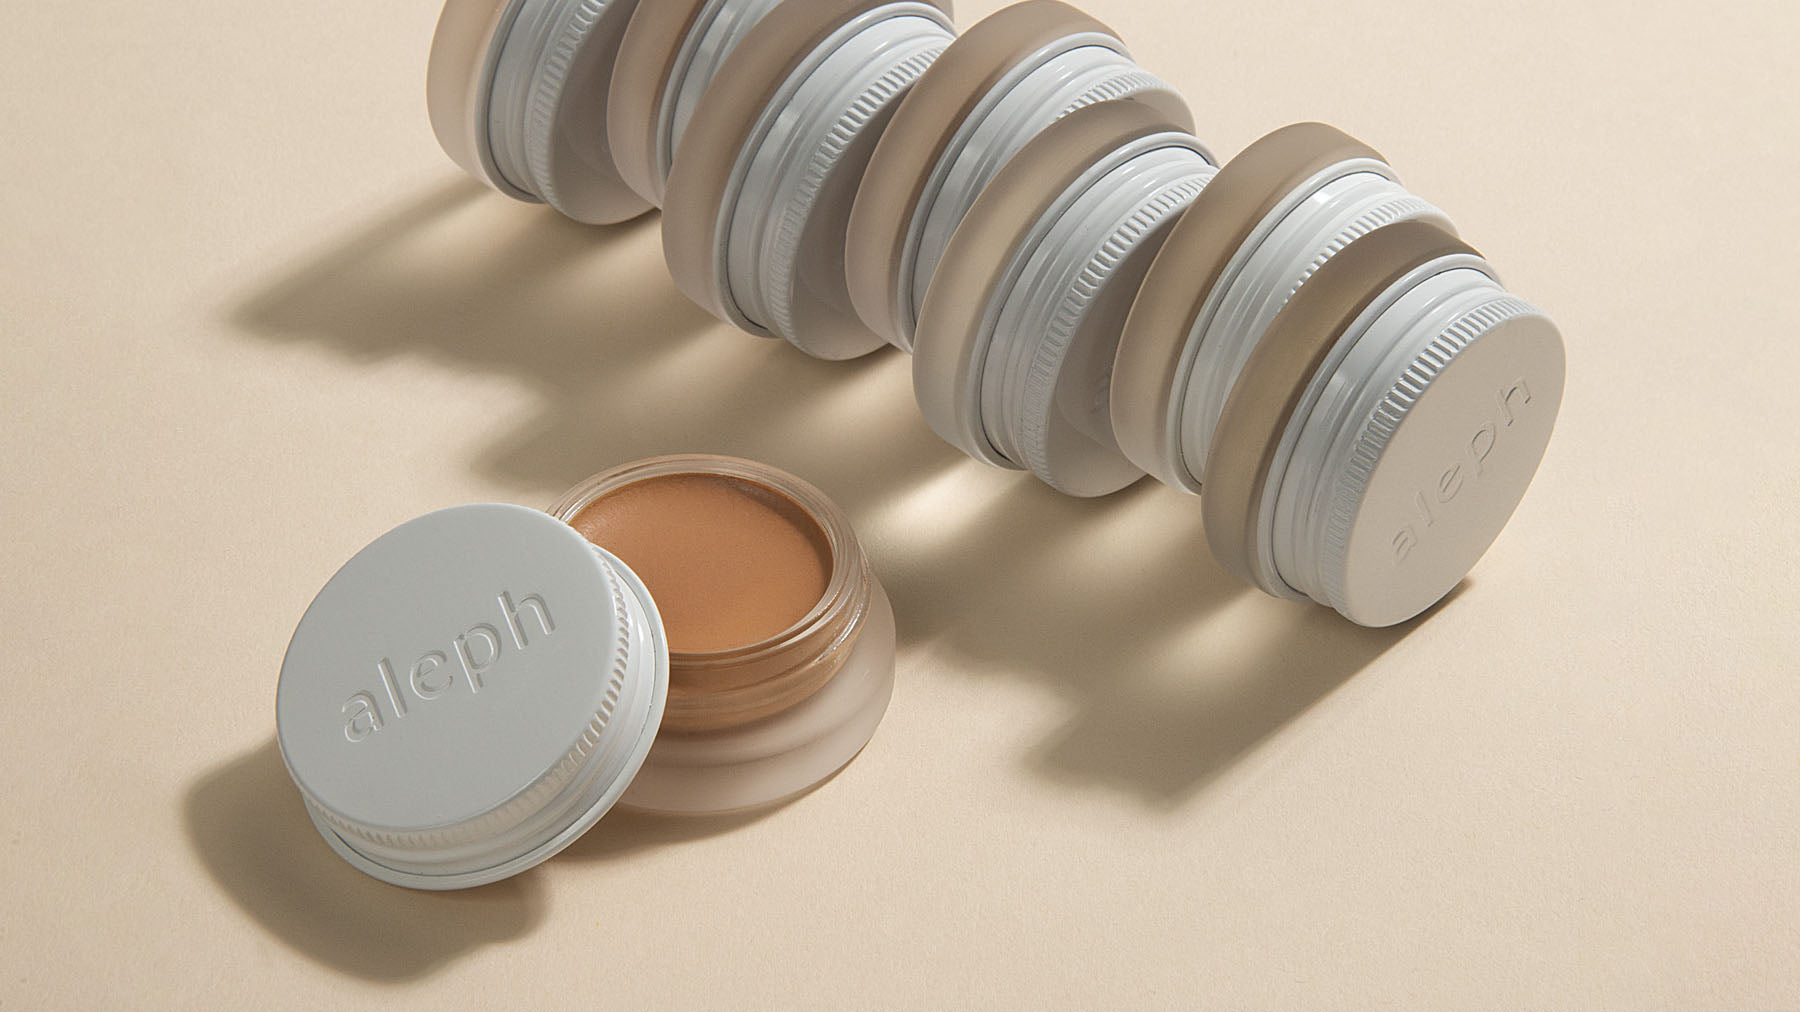 One Product, Your Way: Concealer/Foundation